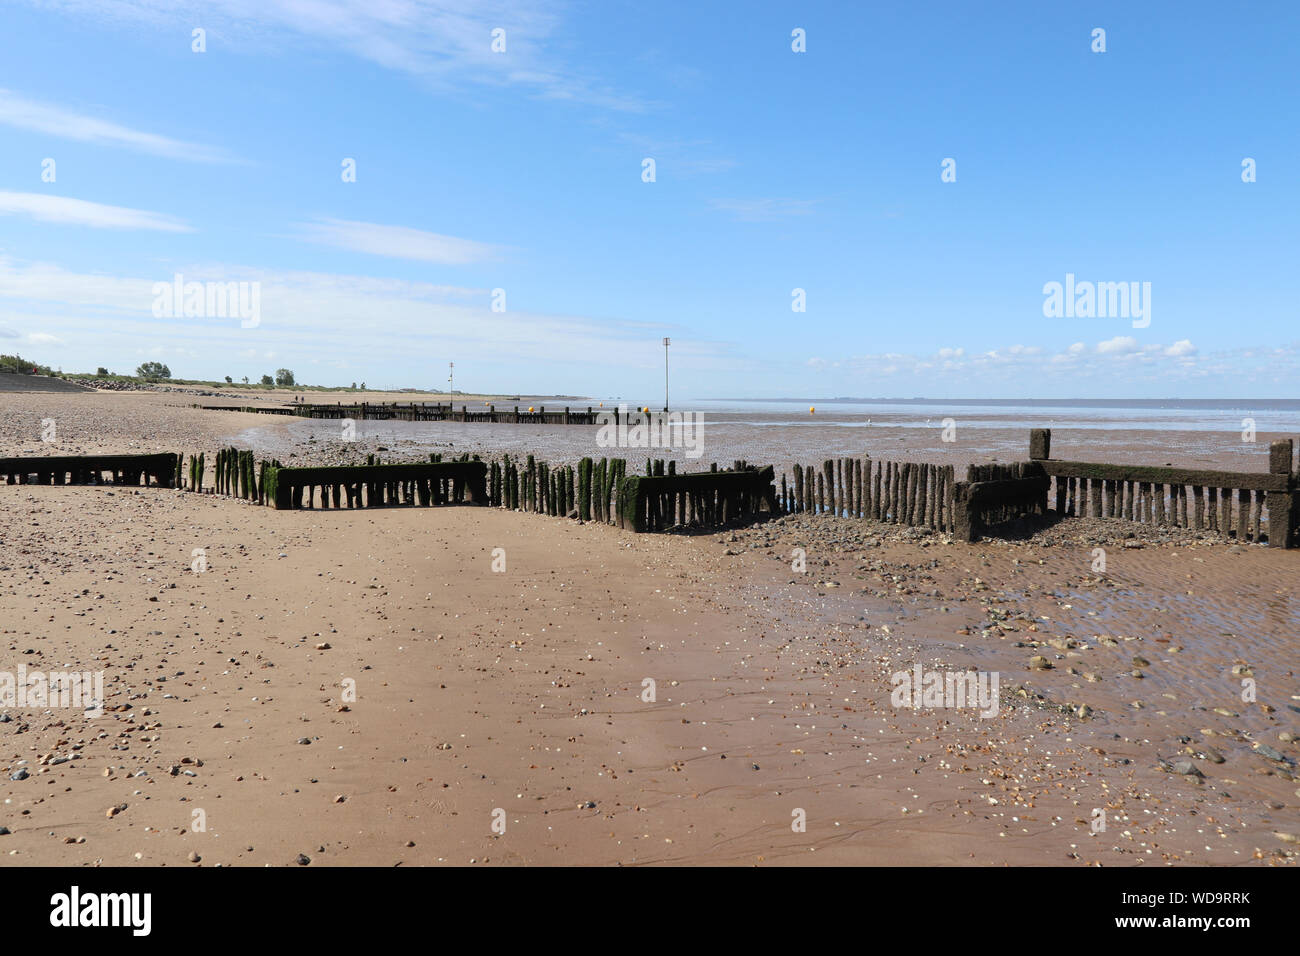 Heacham north on a sunny day with blue clear skies. Shoreline and beach in view. Stock Photo